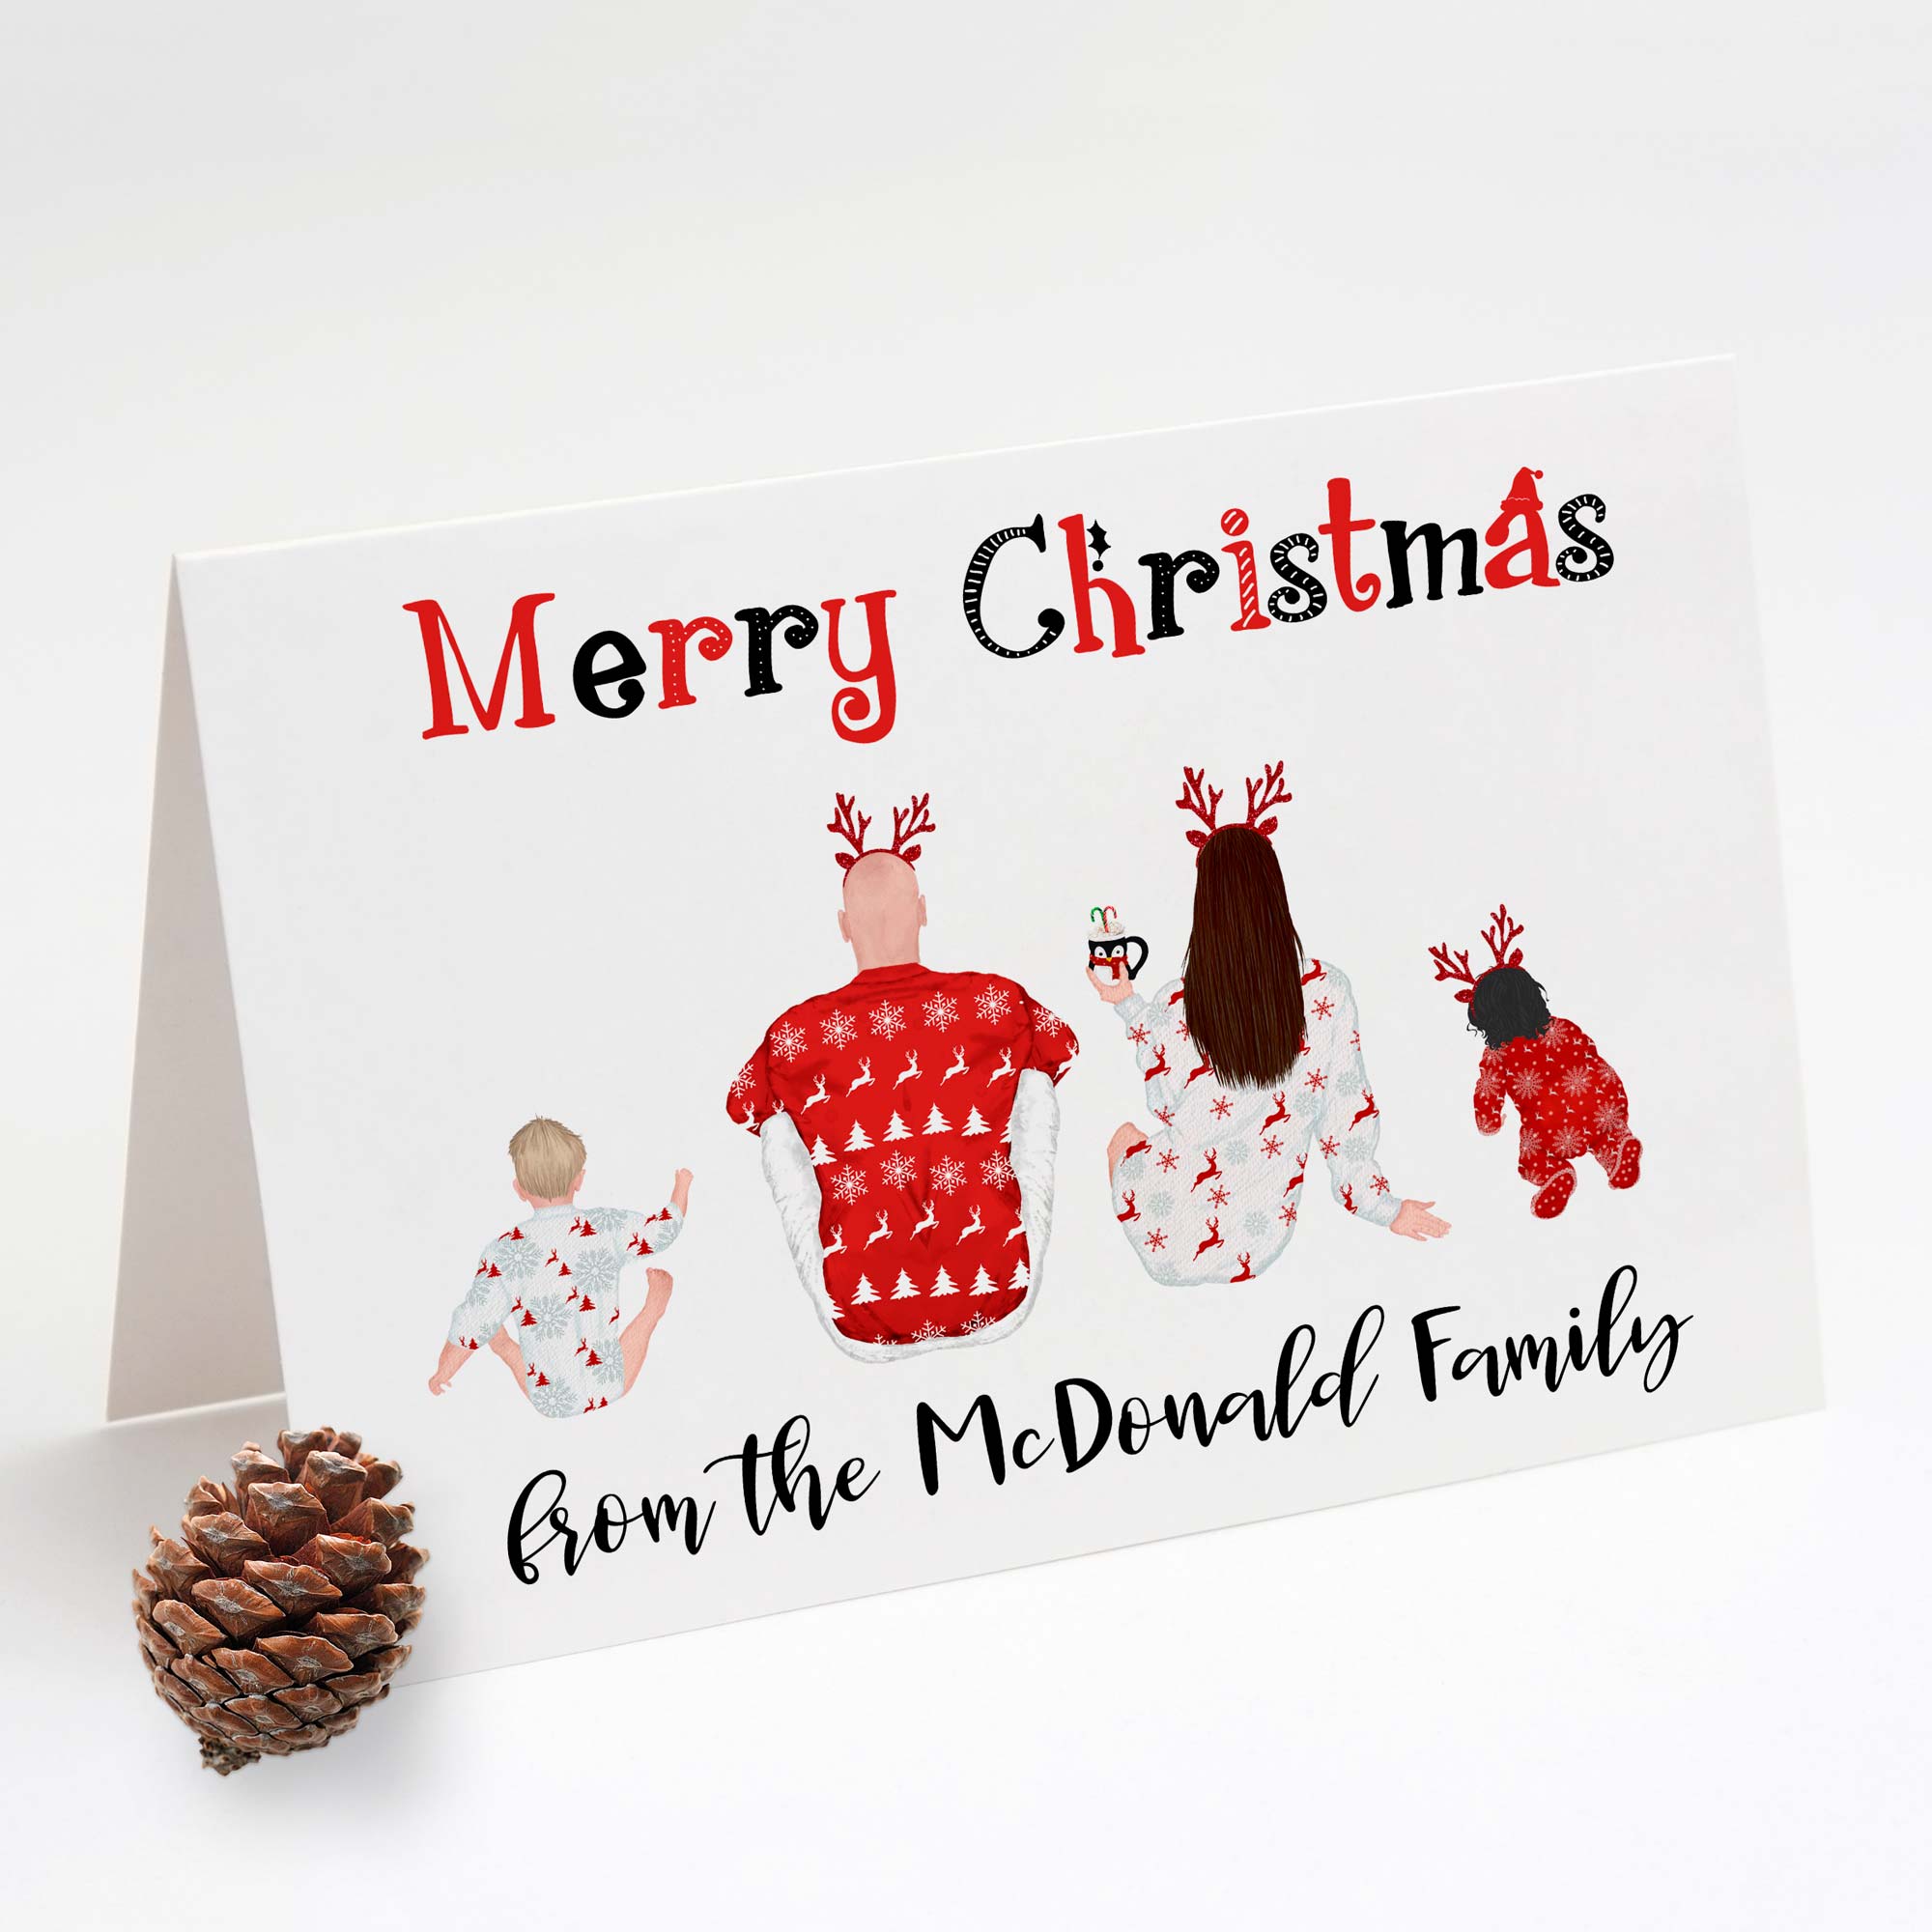 being-loved-christmas-card-for-son-and-family-greeting-cards-hallmark